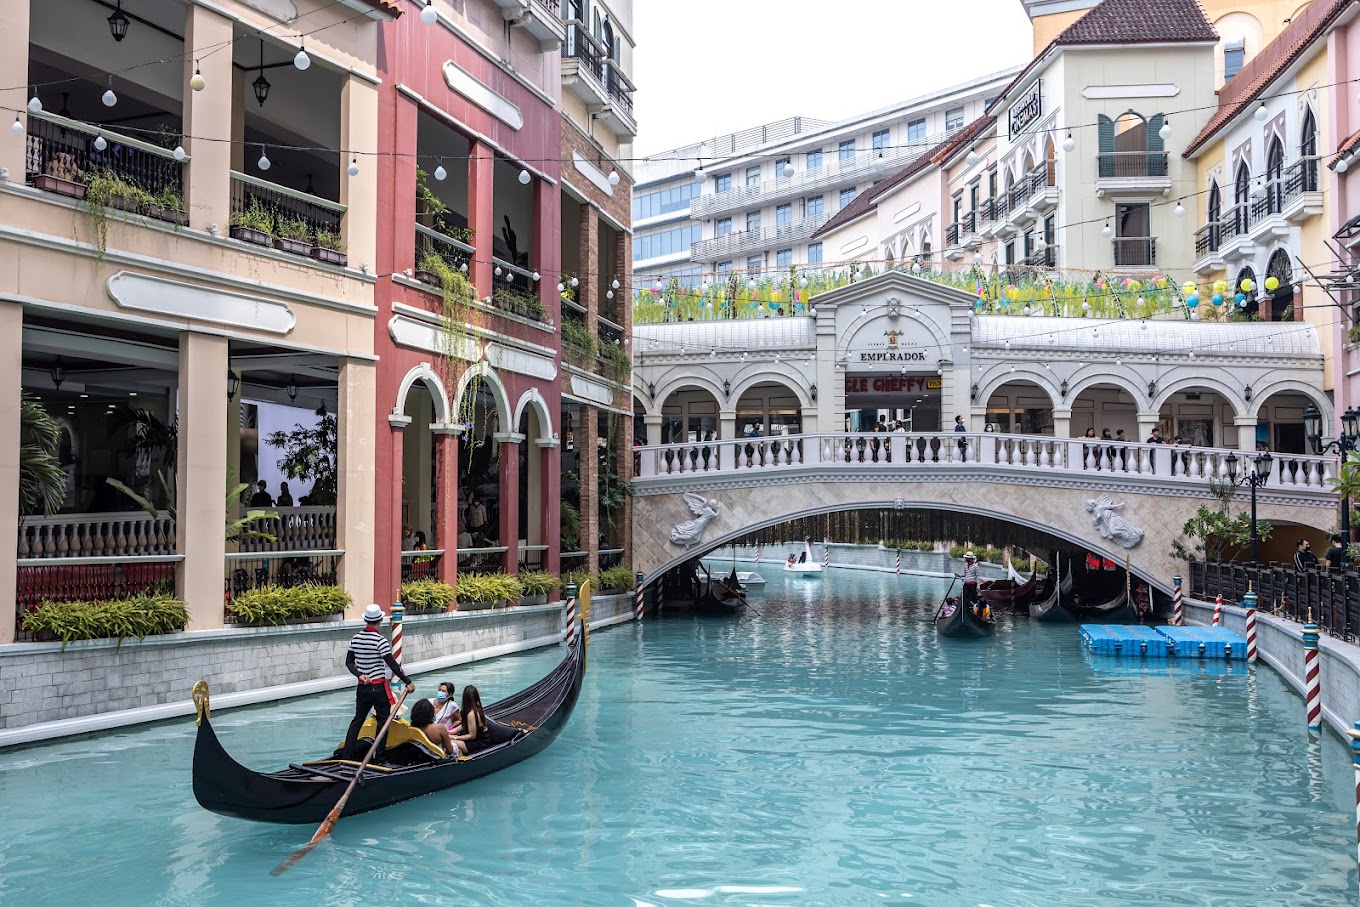 BGC Attractions - Venice Grand Canal Mall